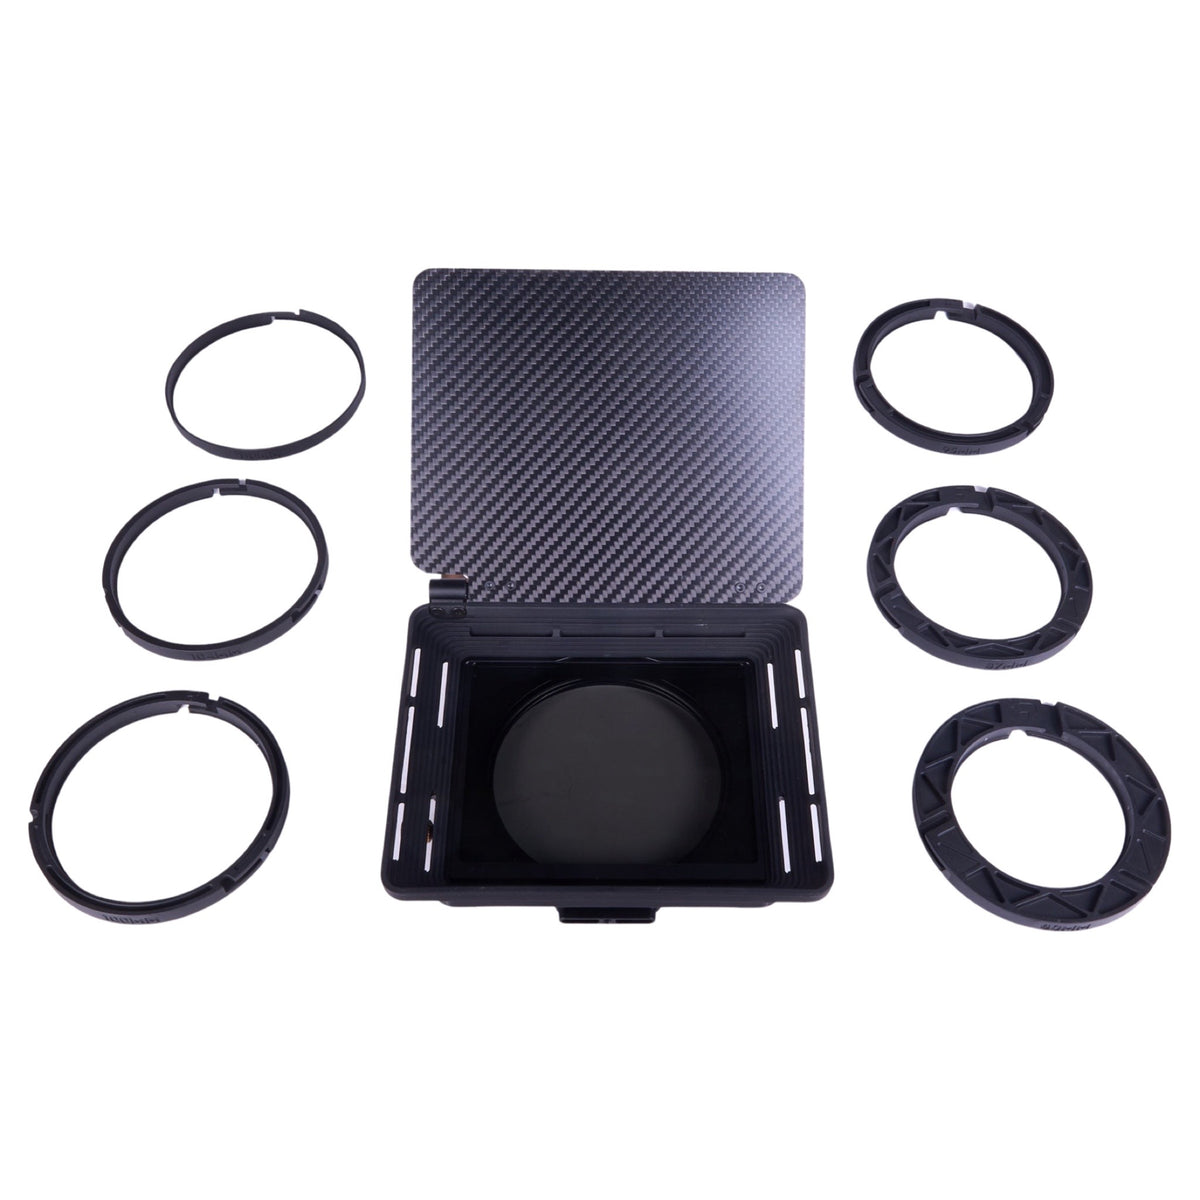 ACC3535 PolarPro Basecamp Matte Box Kit with Variable ND 2-5 &amp; Polarizer Filters_5770.JPG